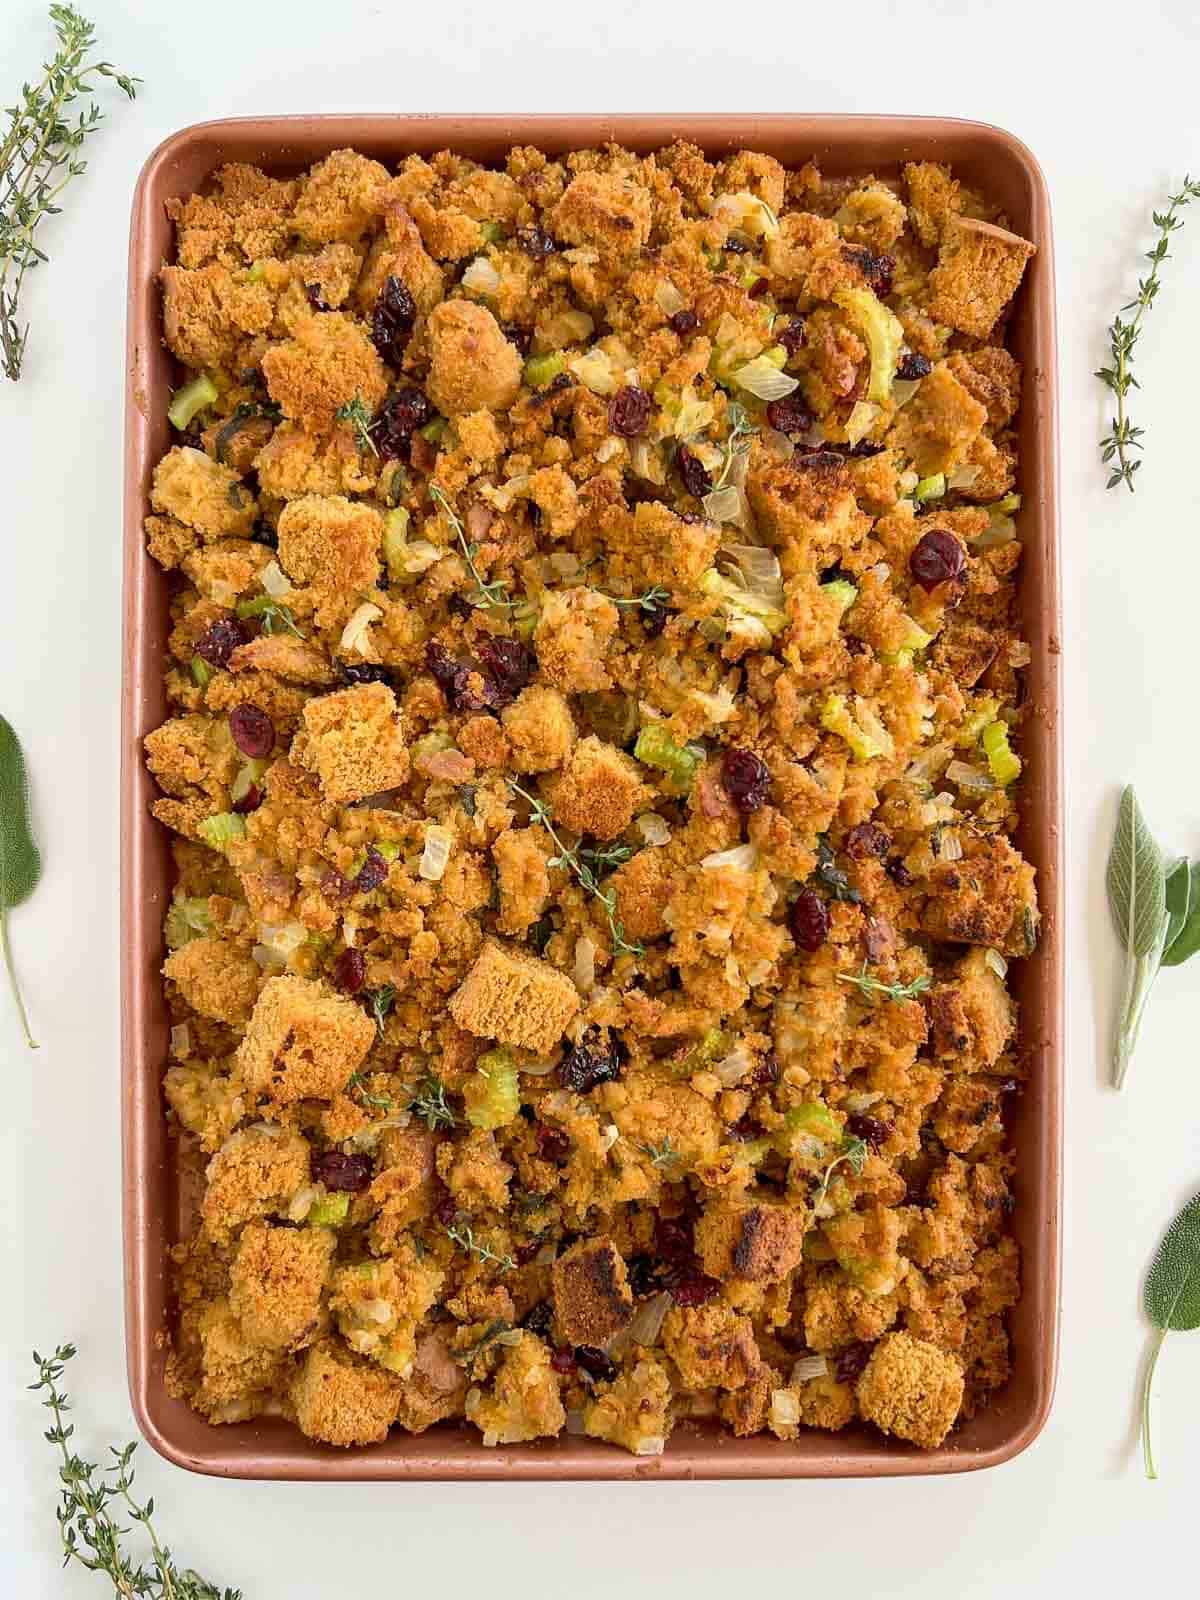 cornbread stuffing out of the oven.